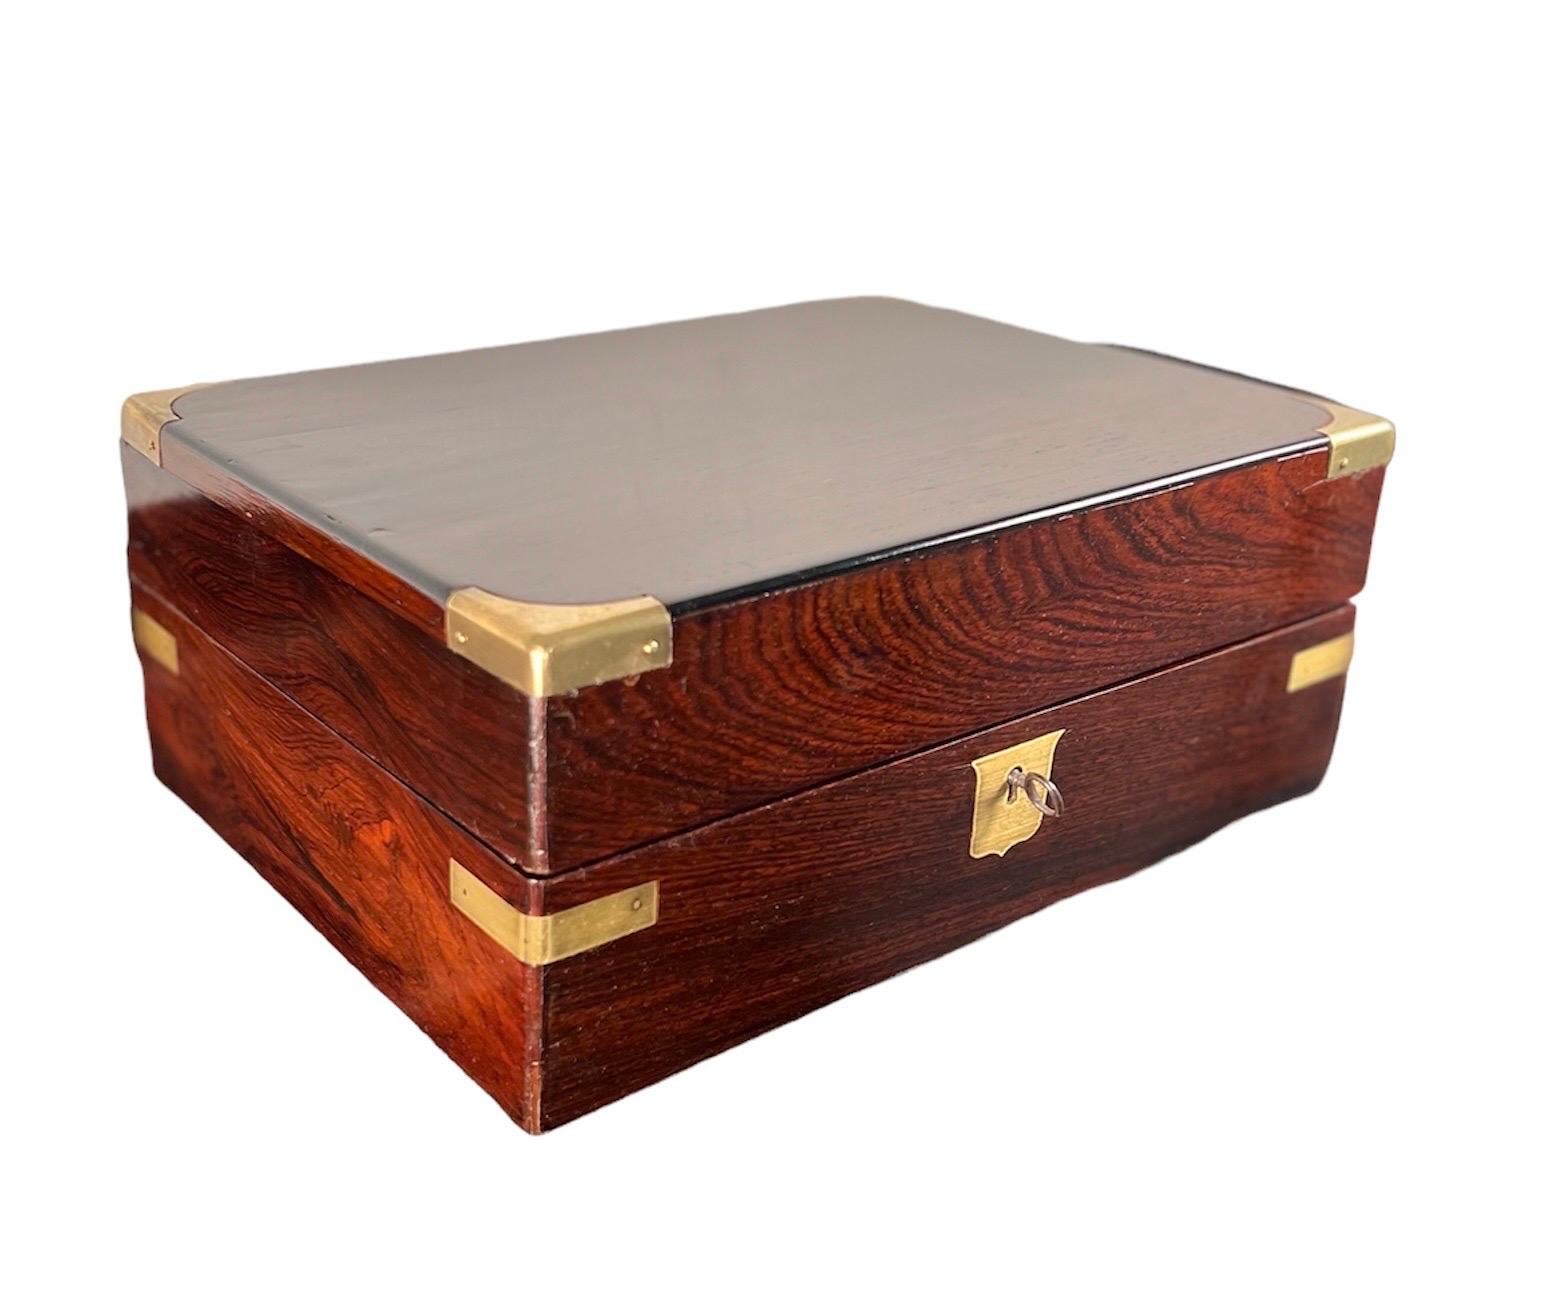 Regency Brass Bound Rosewood Fitted traveling , dressing box 
With fitted interior,  containing 2 fragrance bottles. Silver lidded makeup 
Jars, a mirror & a tooled leather compartment cover. Also with one key.